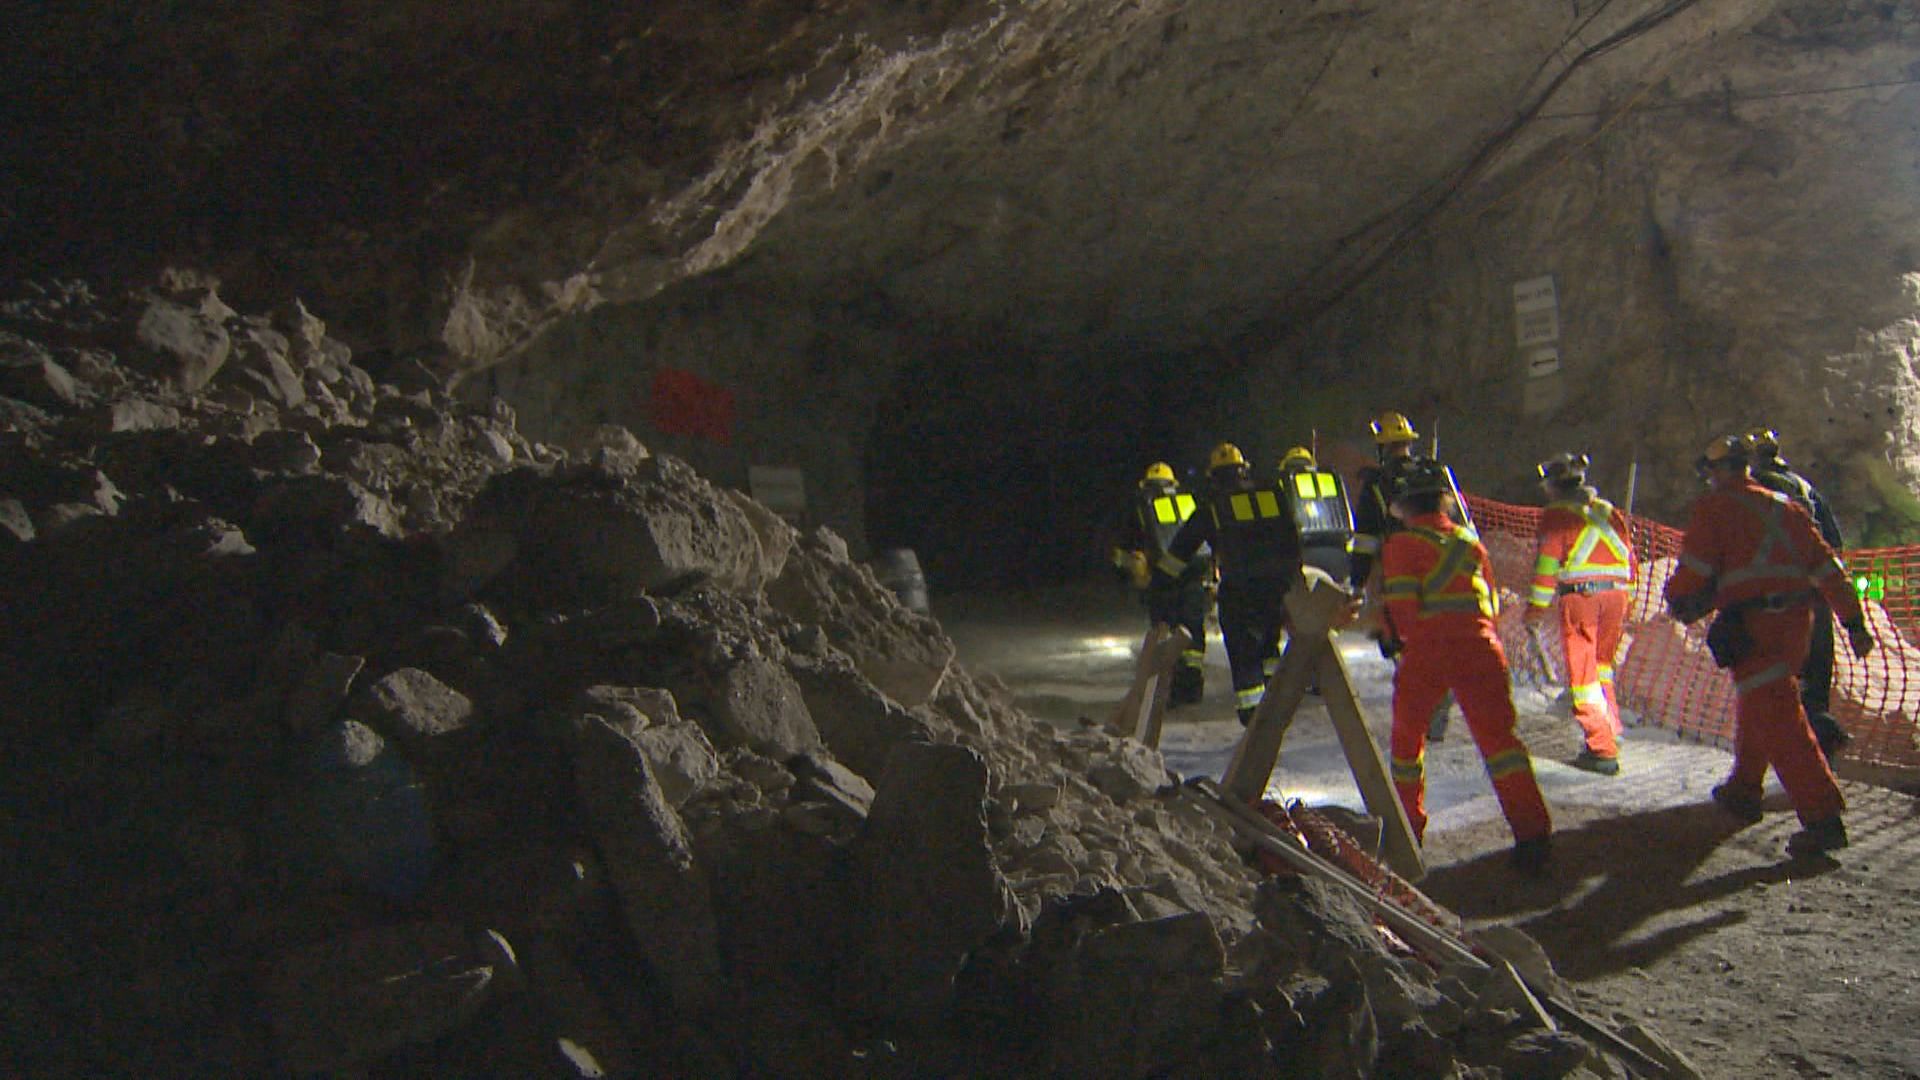 Teams show off skills during Manitoba mine rescue competition